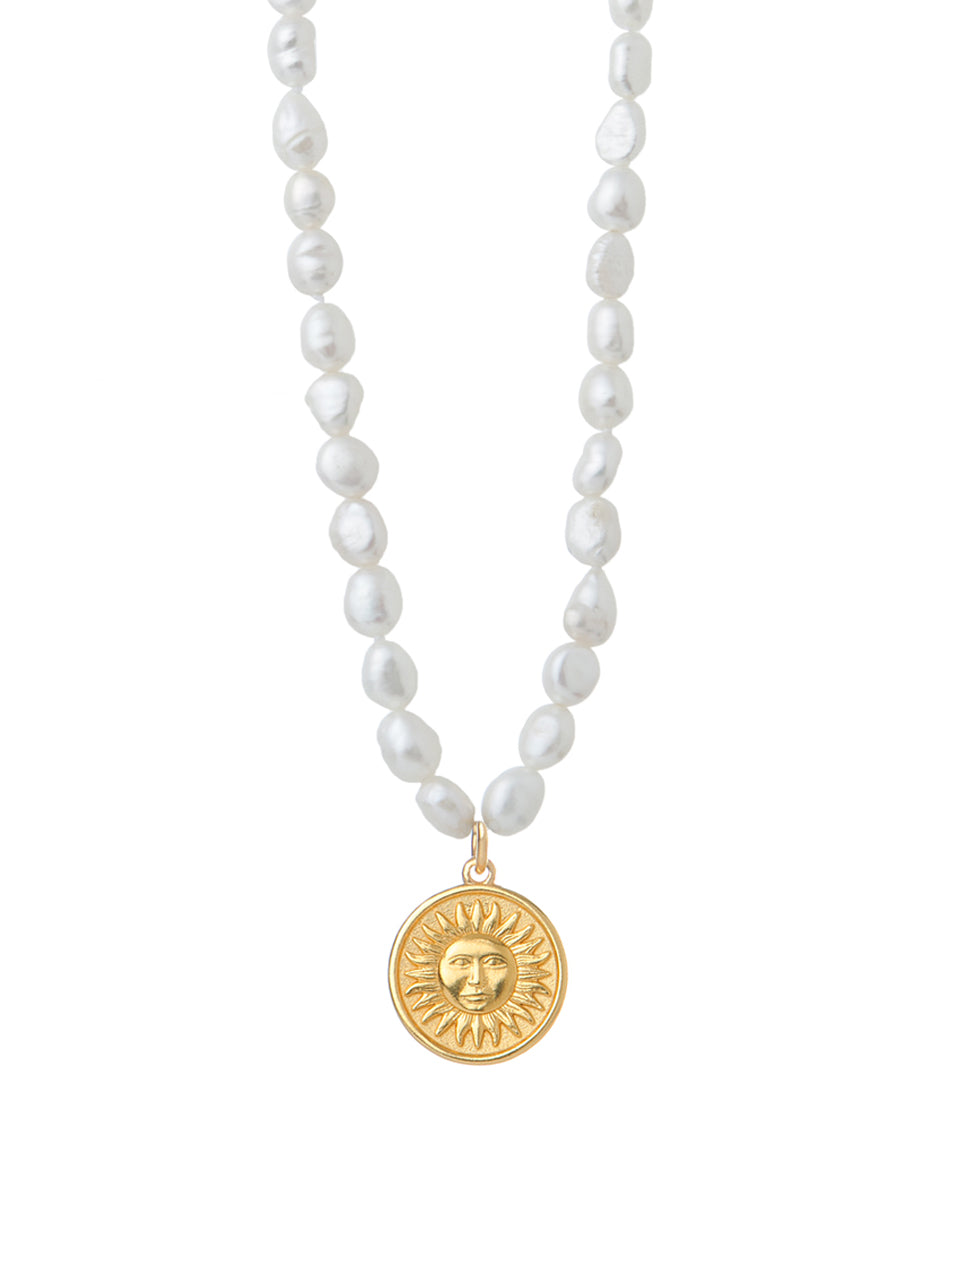 Sun White Corals and Pearls Necklace